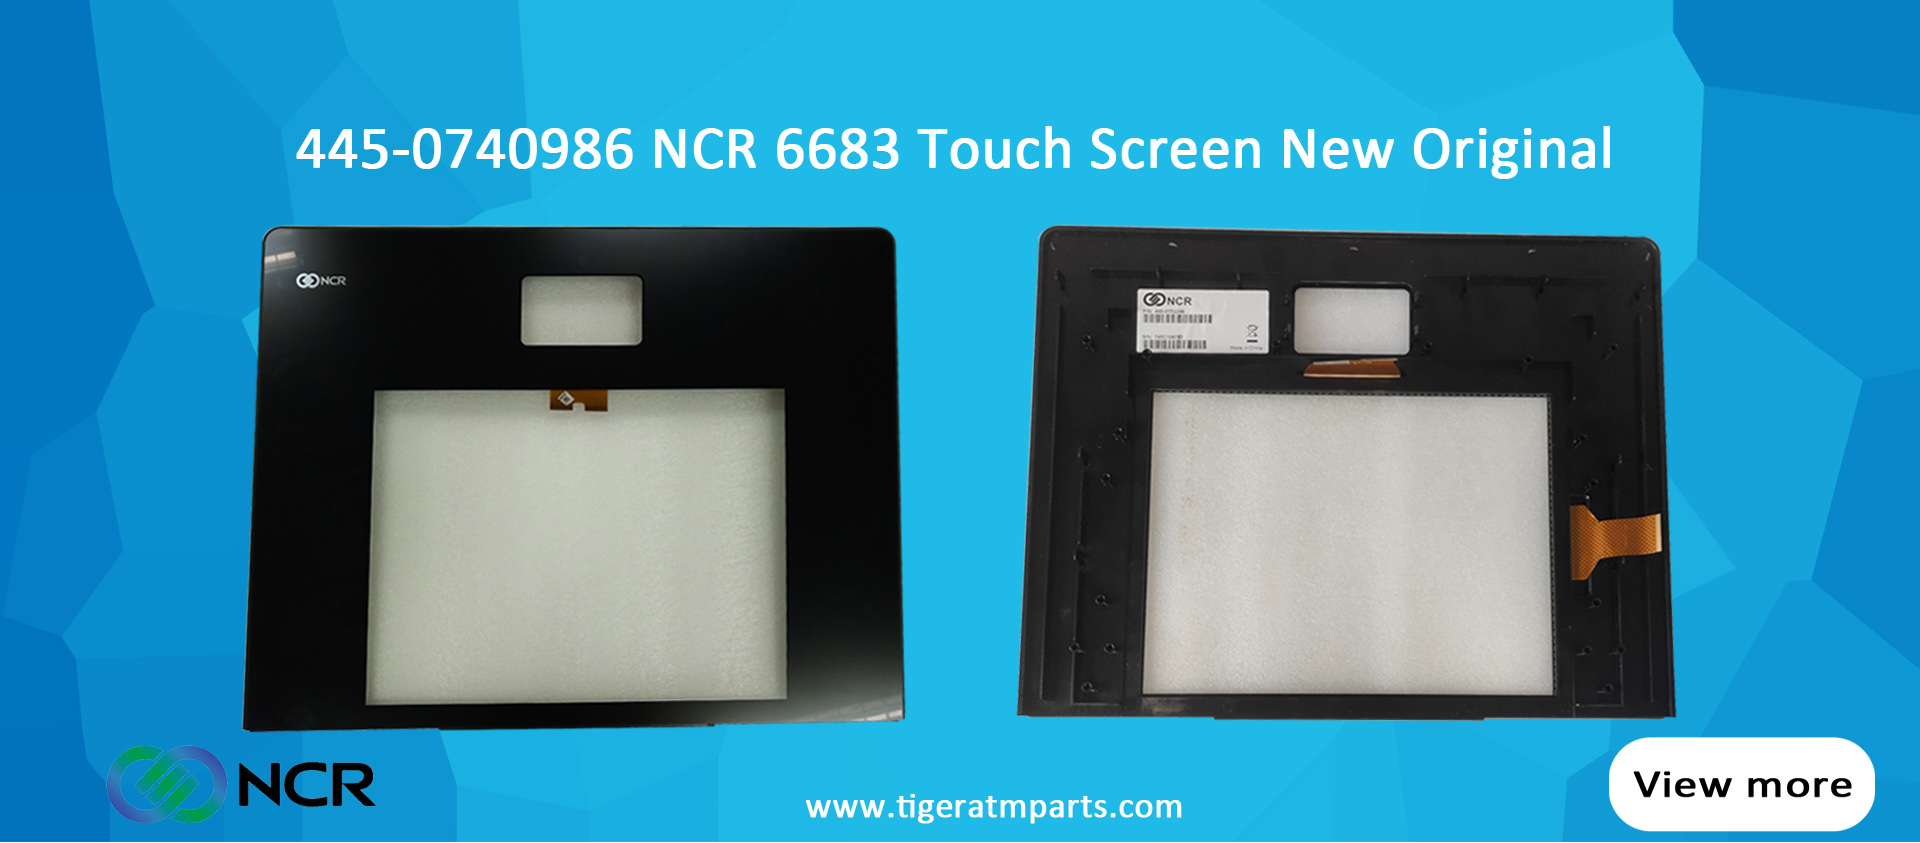 445-0740986 NCR 6683 Touch Screen New Original